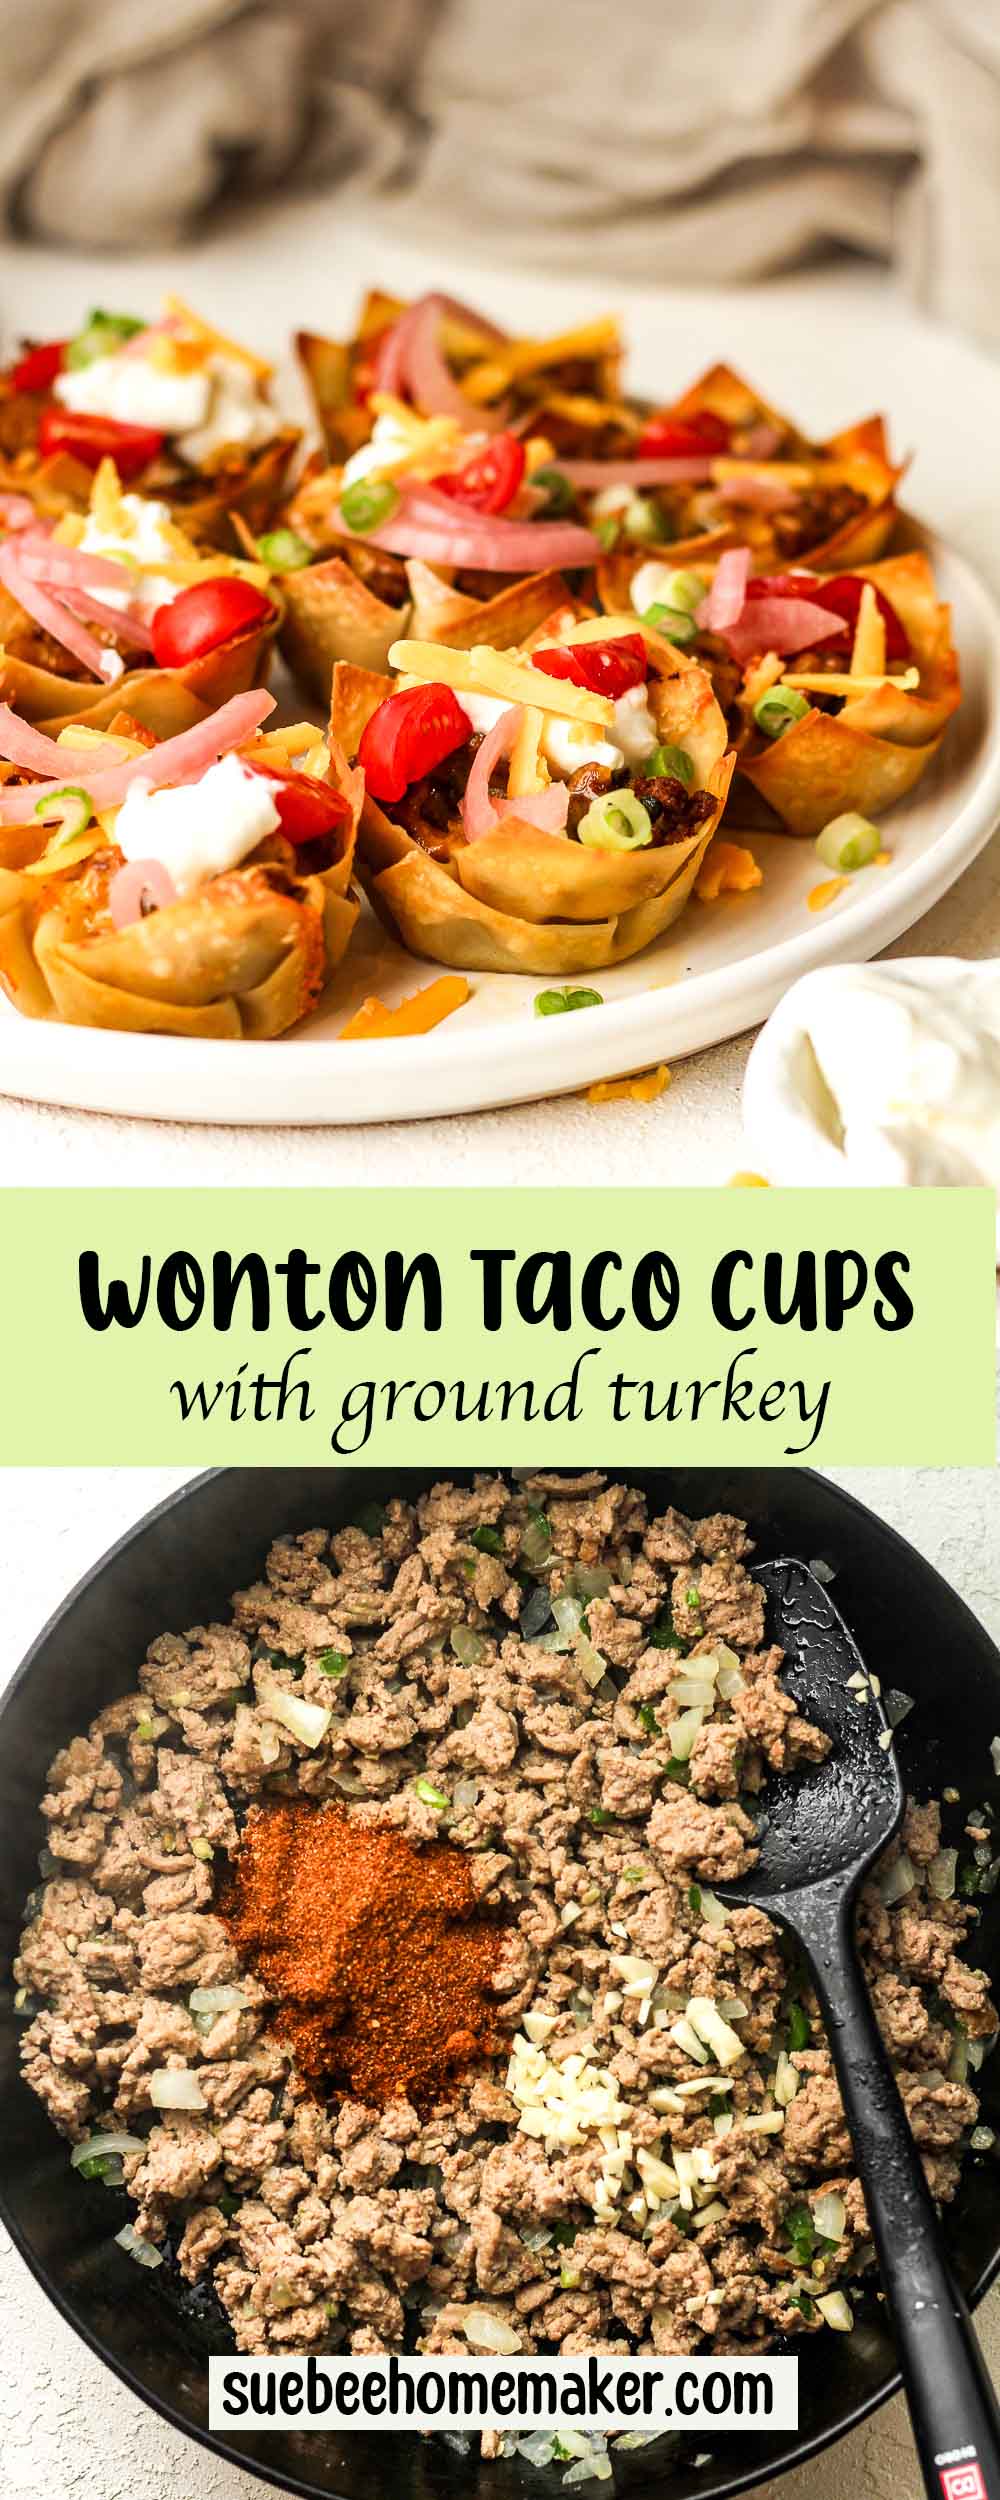 A collage of photos of wonton taco cups with ground turkey.